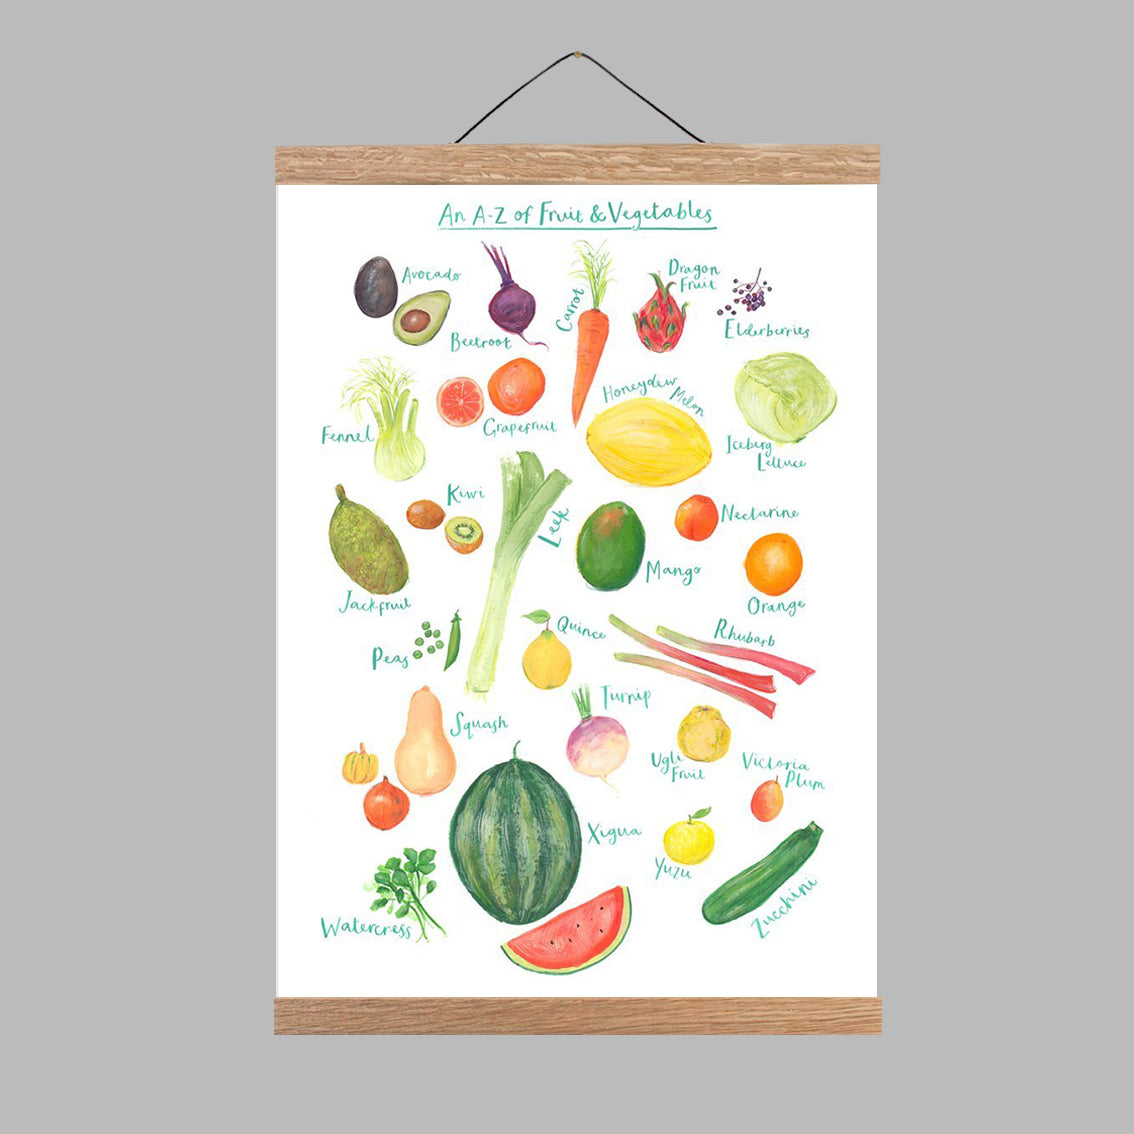 A3 A to Z of Fruit and Vegetables Art Print